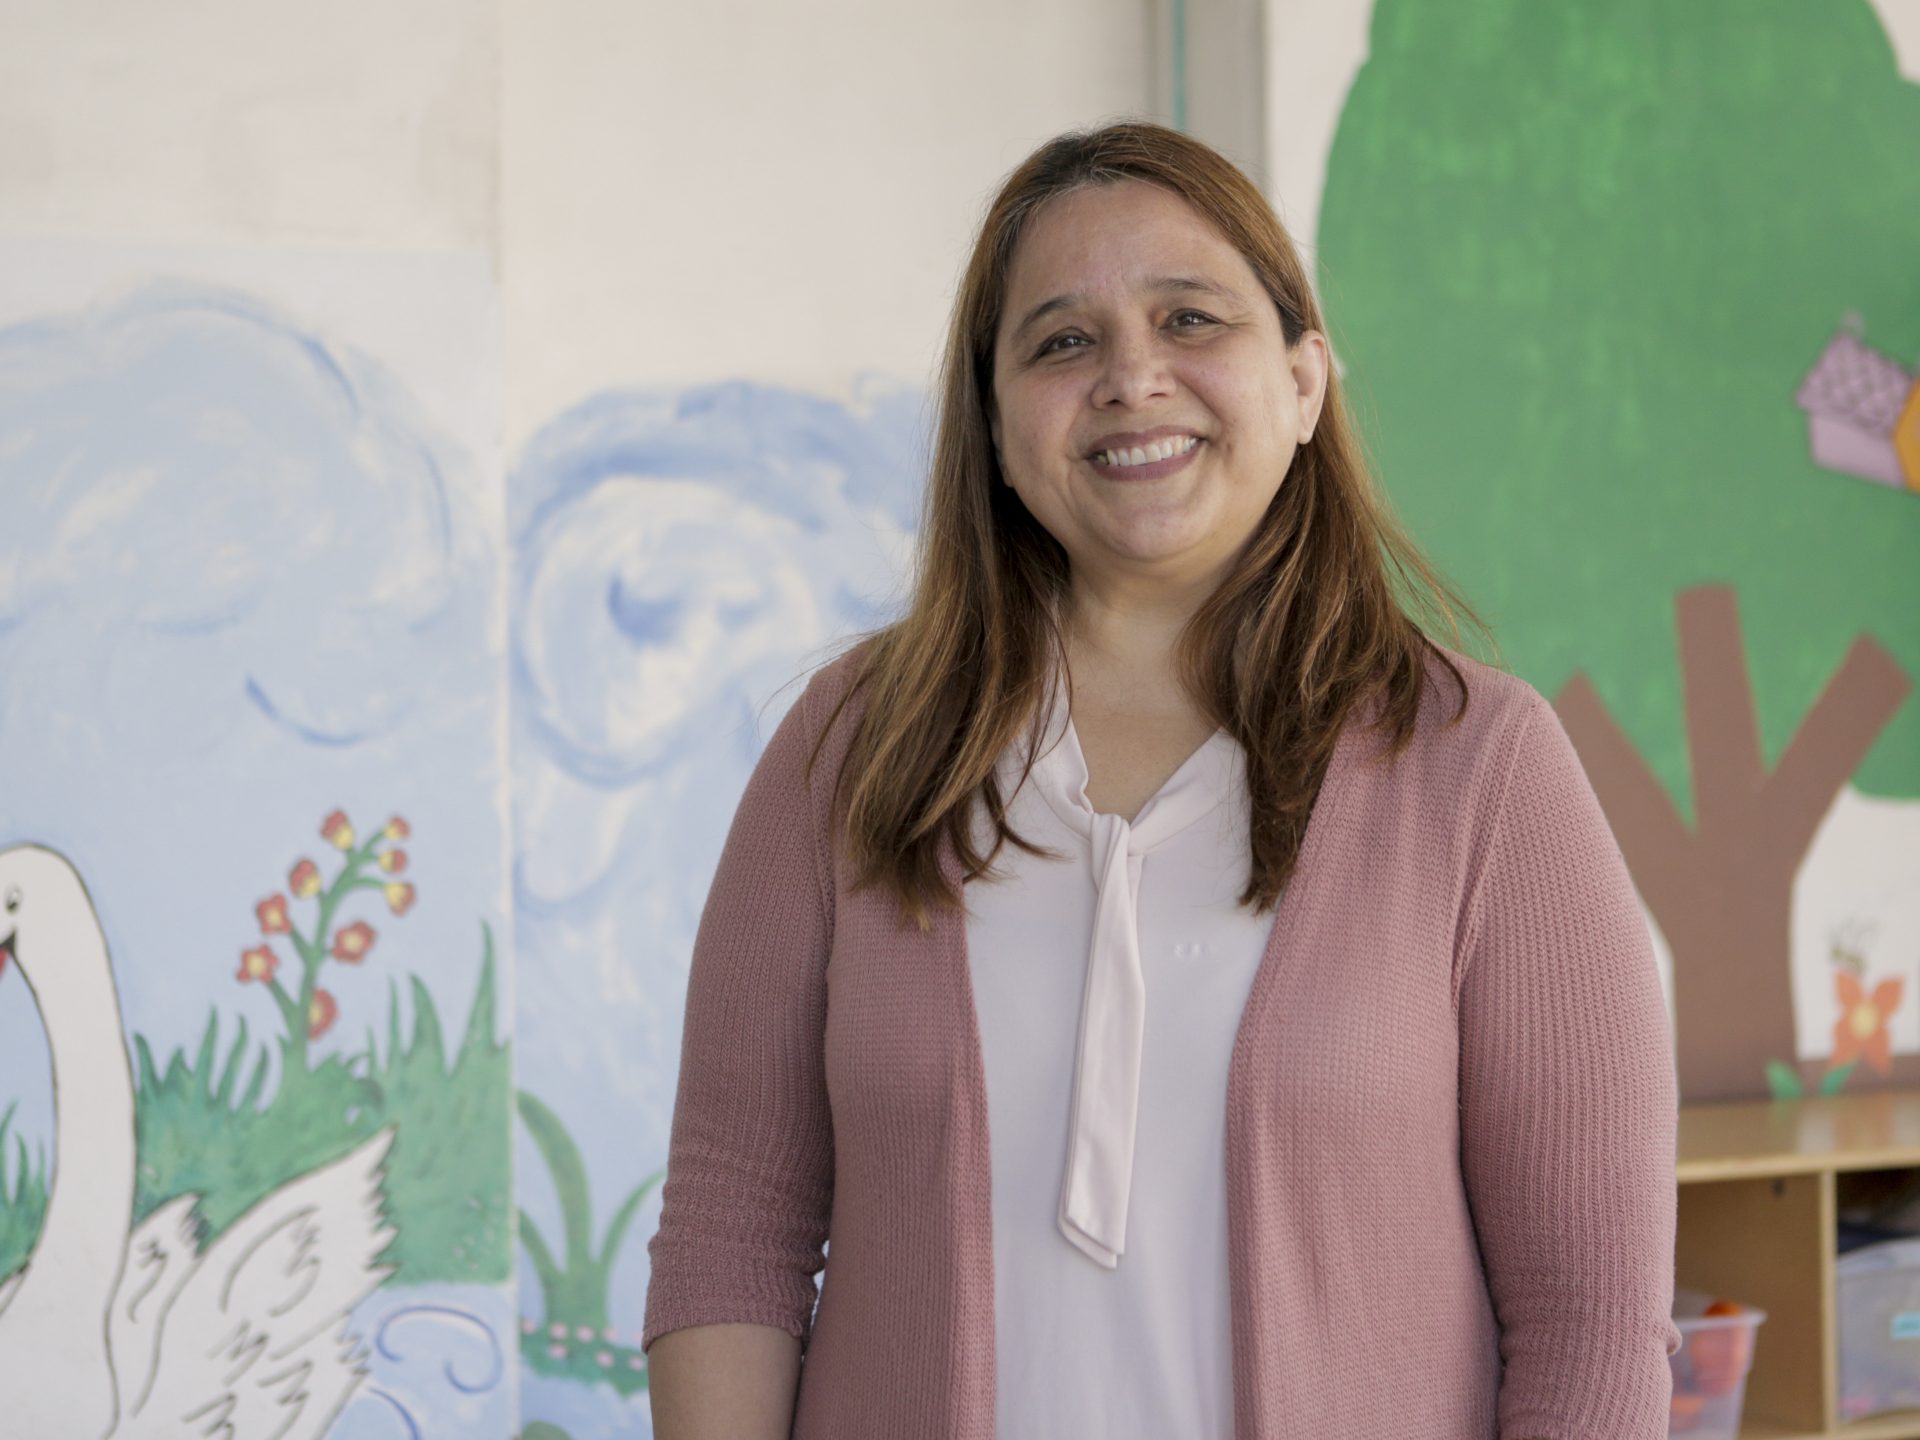 "We did everything we could up to the moment that we couldn't," says Sarah Soriano, Executive Director of Young Horizons Child Development Centers, which has closed amid the coronavirus pandemic.